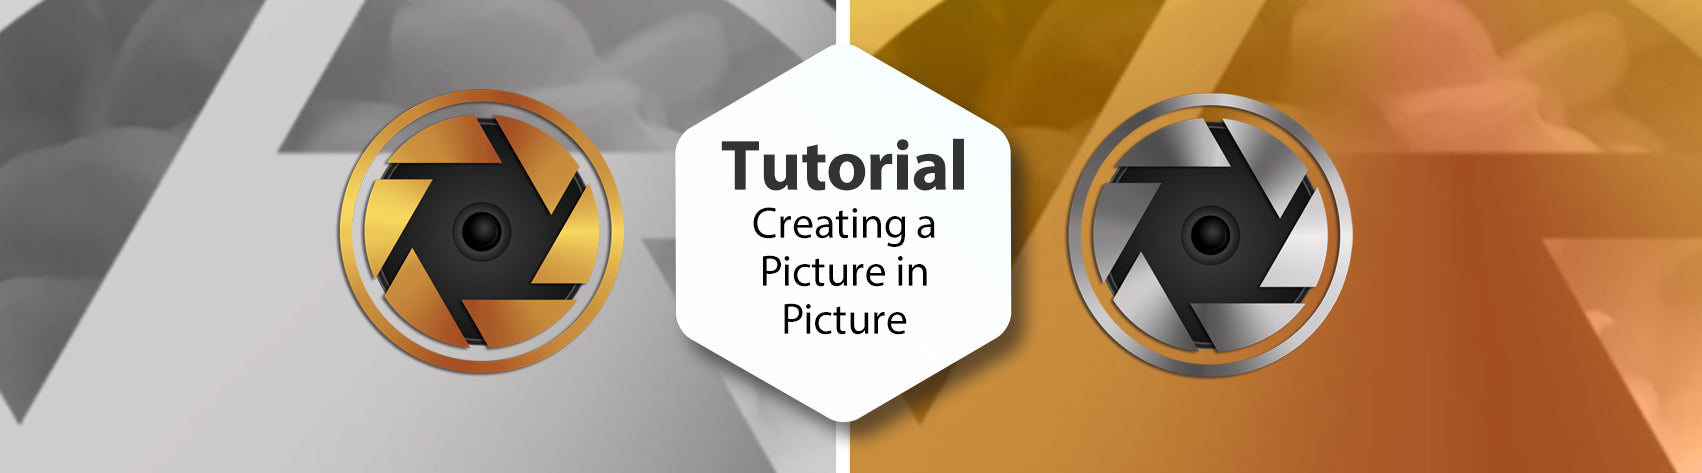 Tutorial - Creating the Picture in Picture Effect